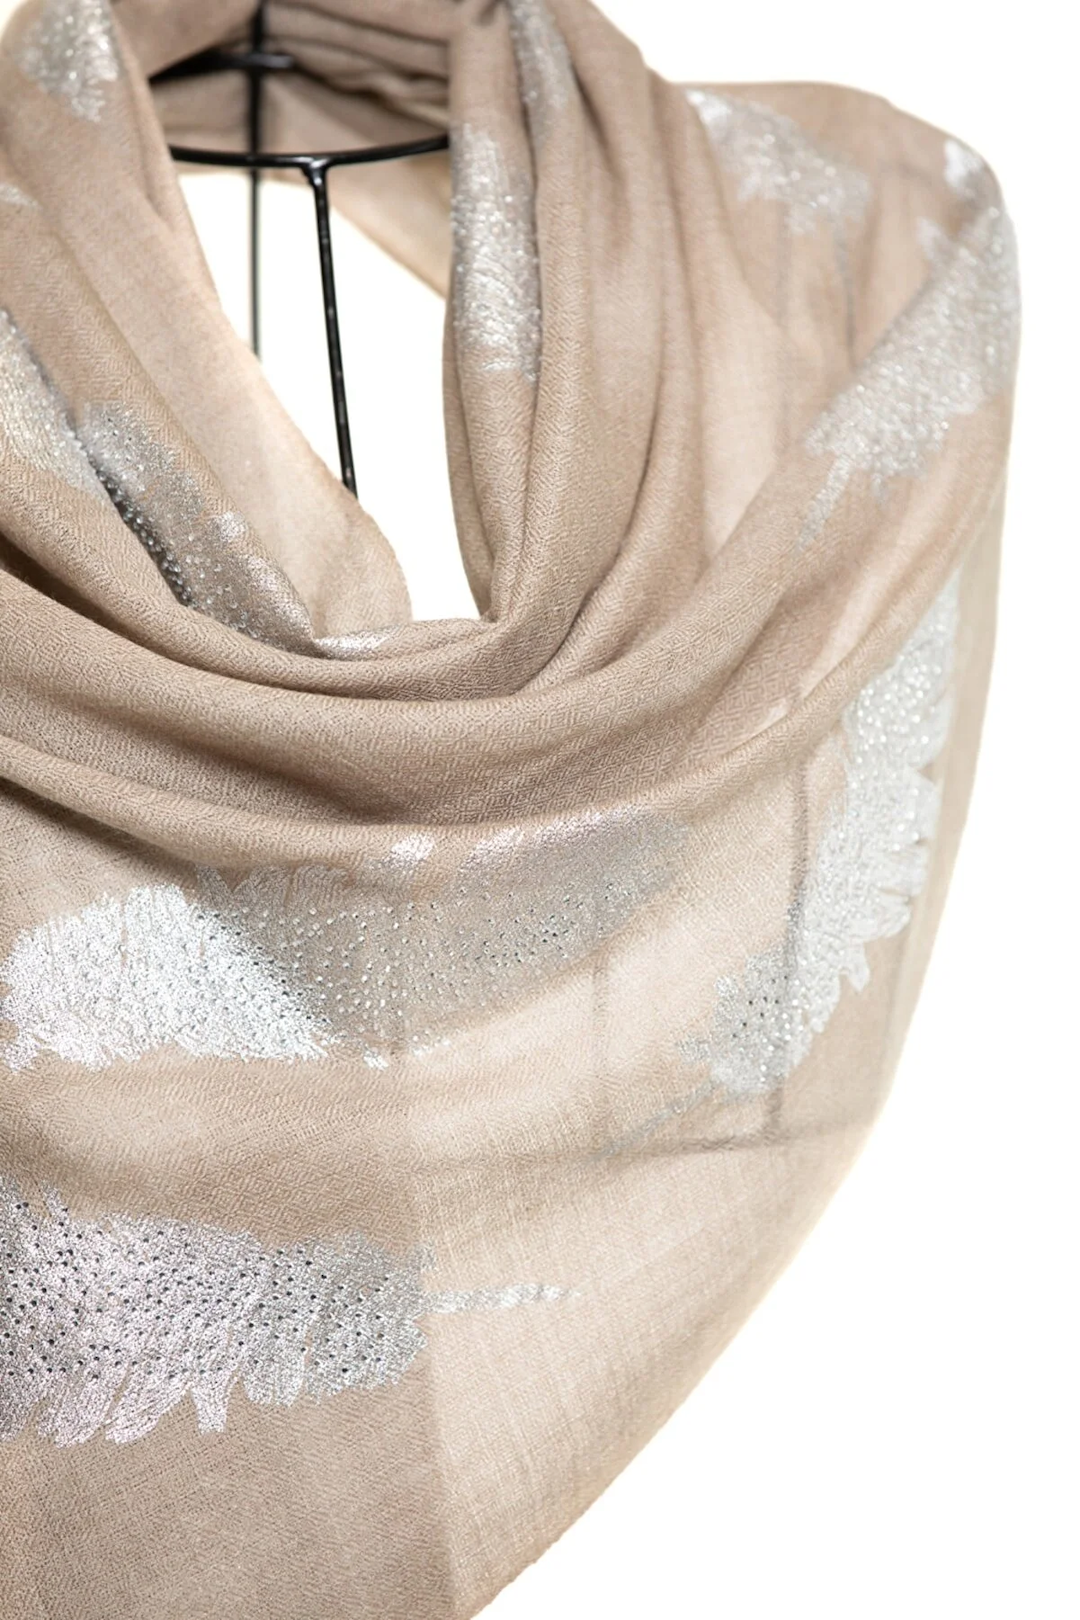 Angel Feathers Crystal Feathers Shawl Stole - Toush Silver